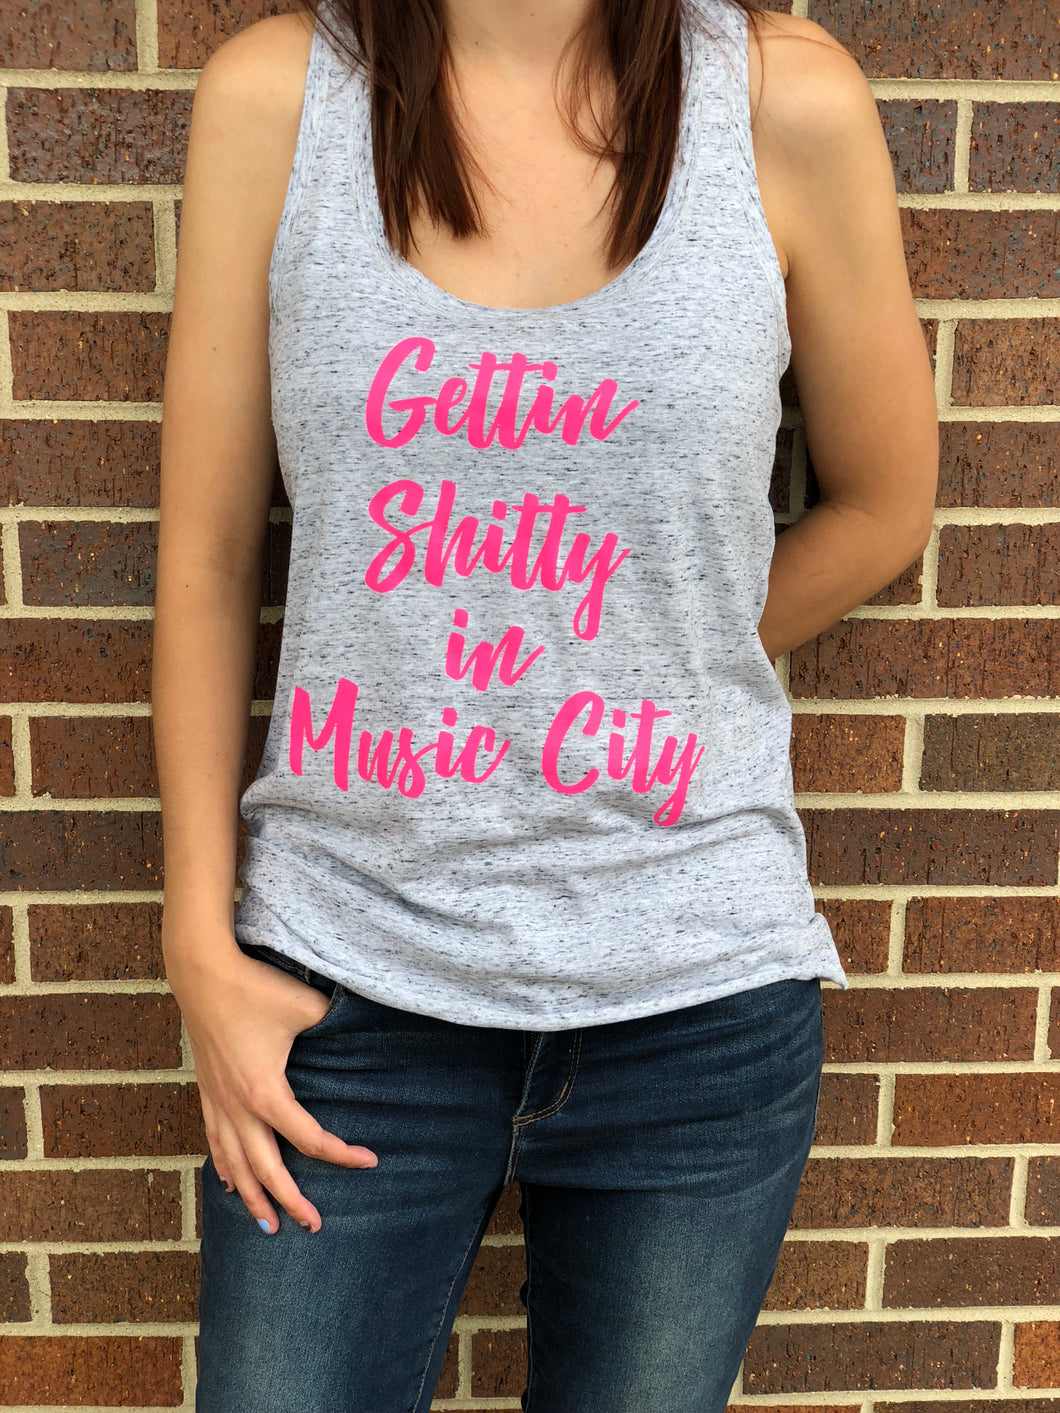 Getting Shitty in Music City